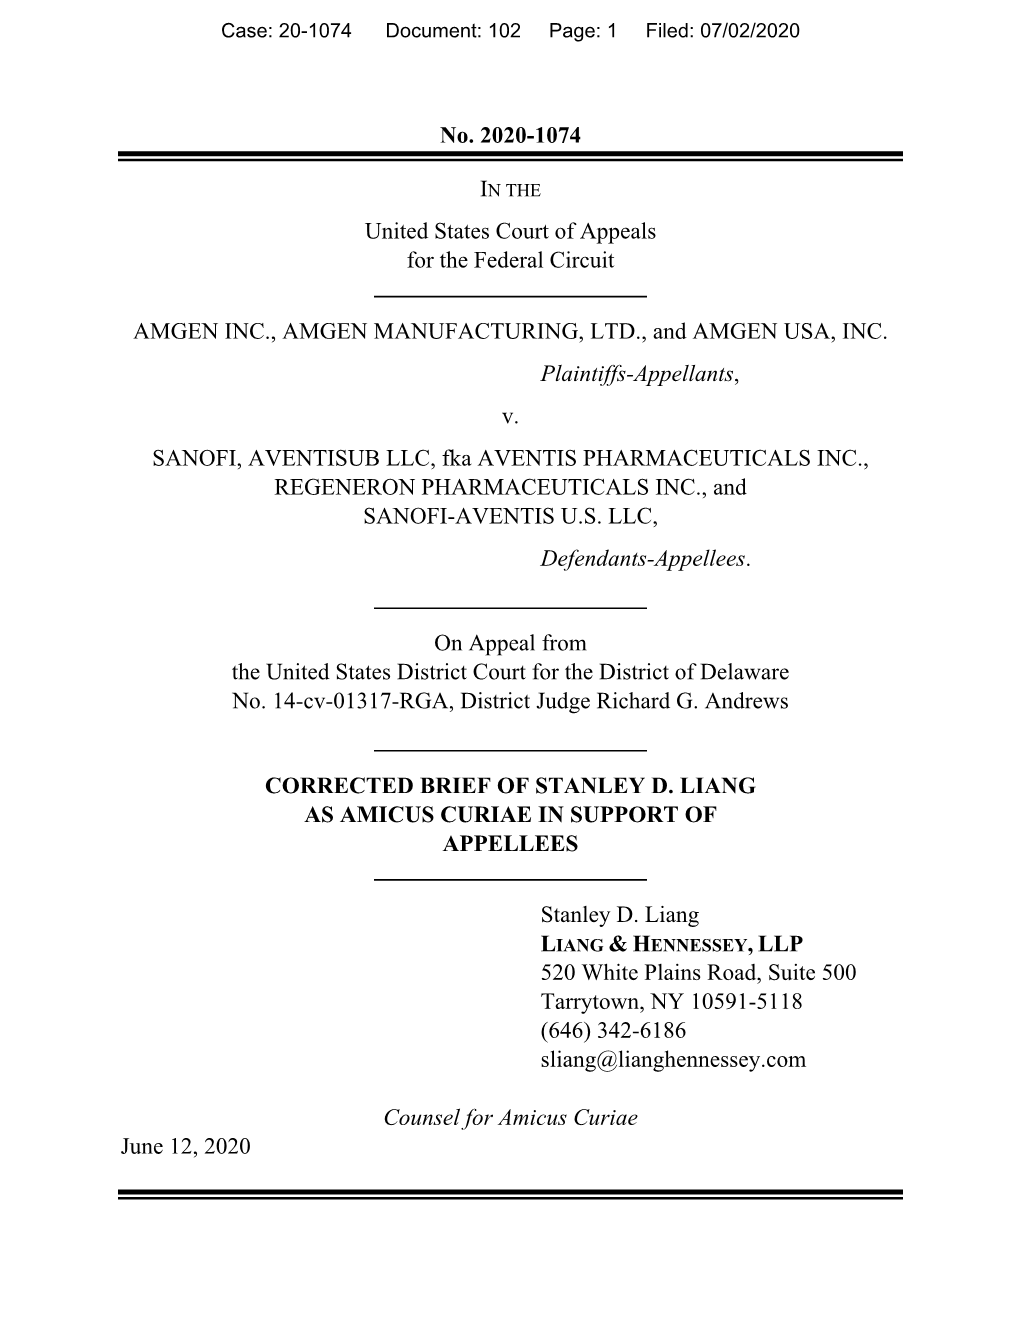 No. 2020-1074 United States Court of Appeals for the Federal